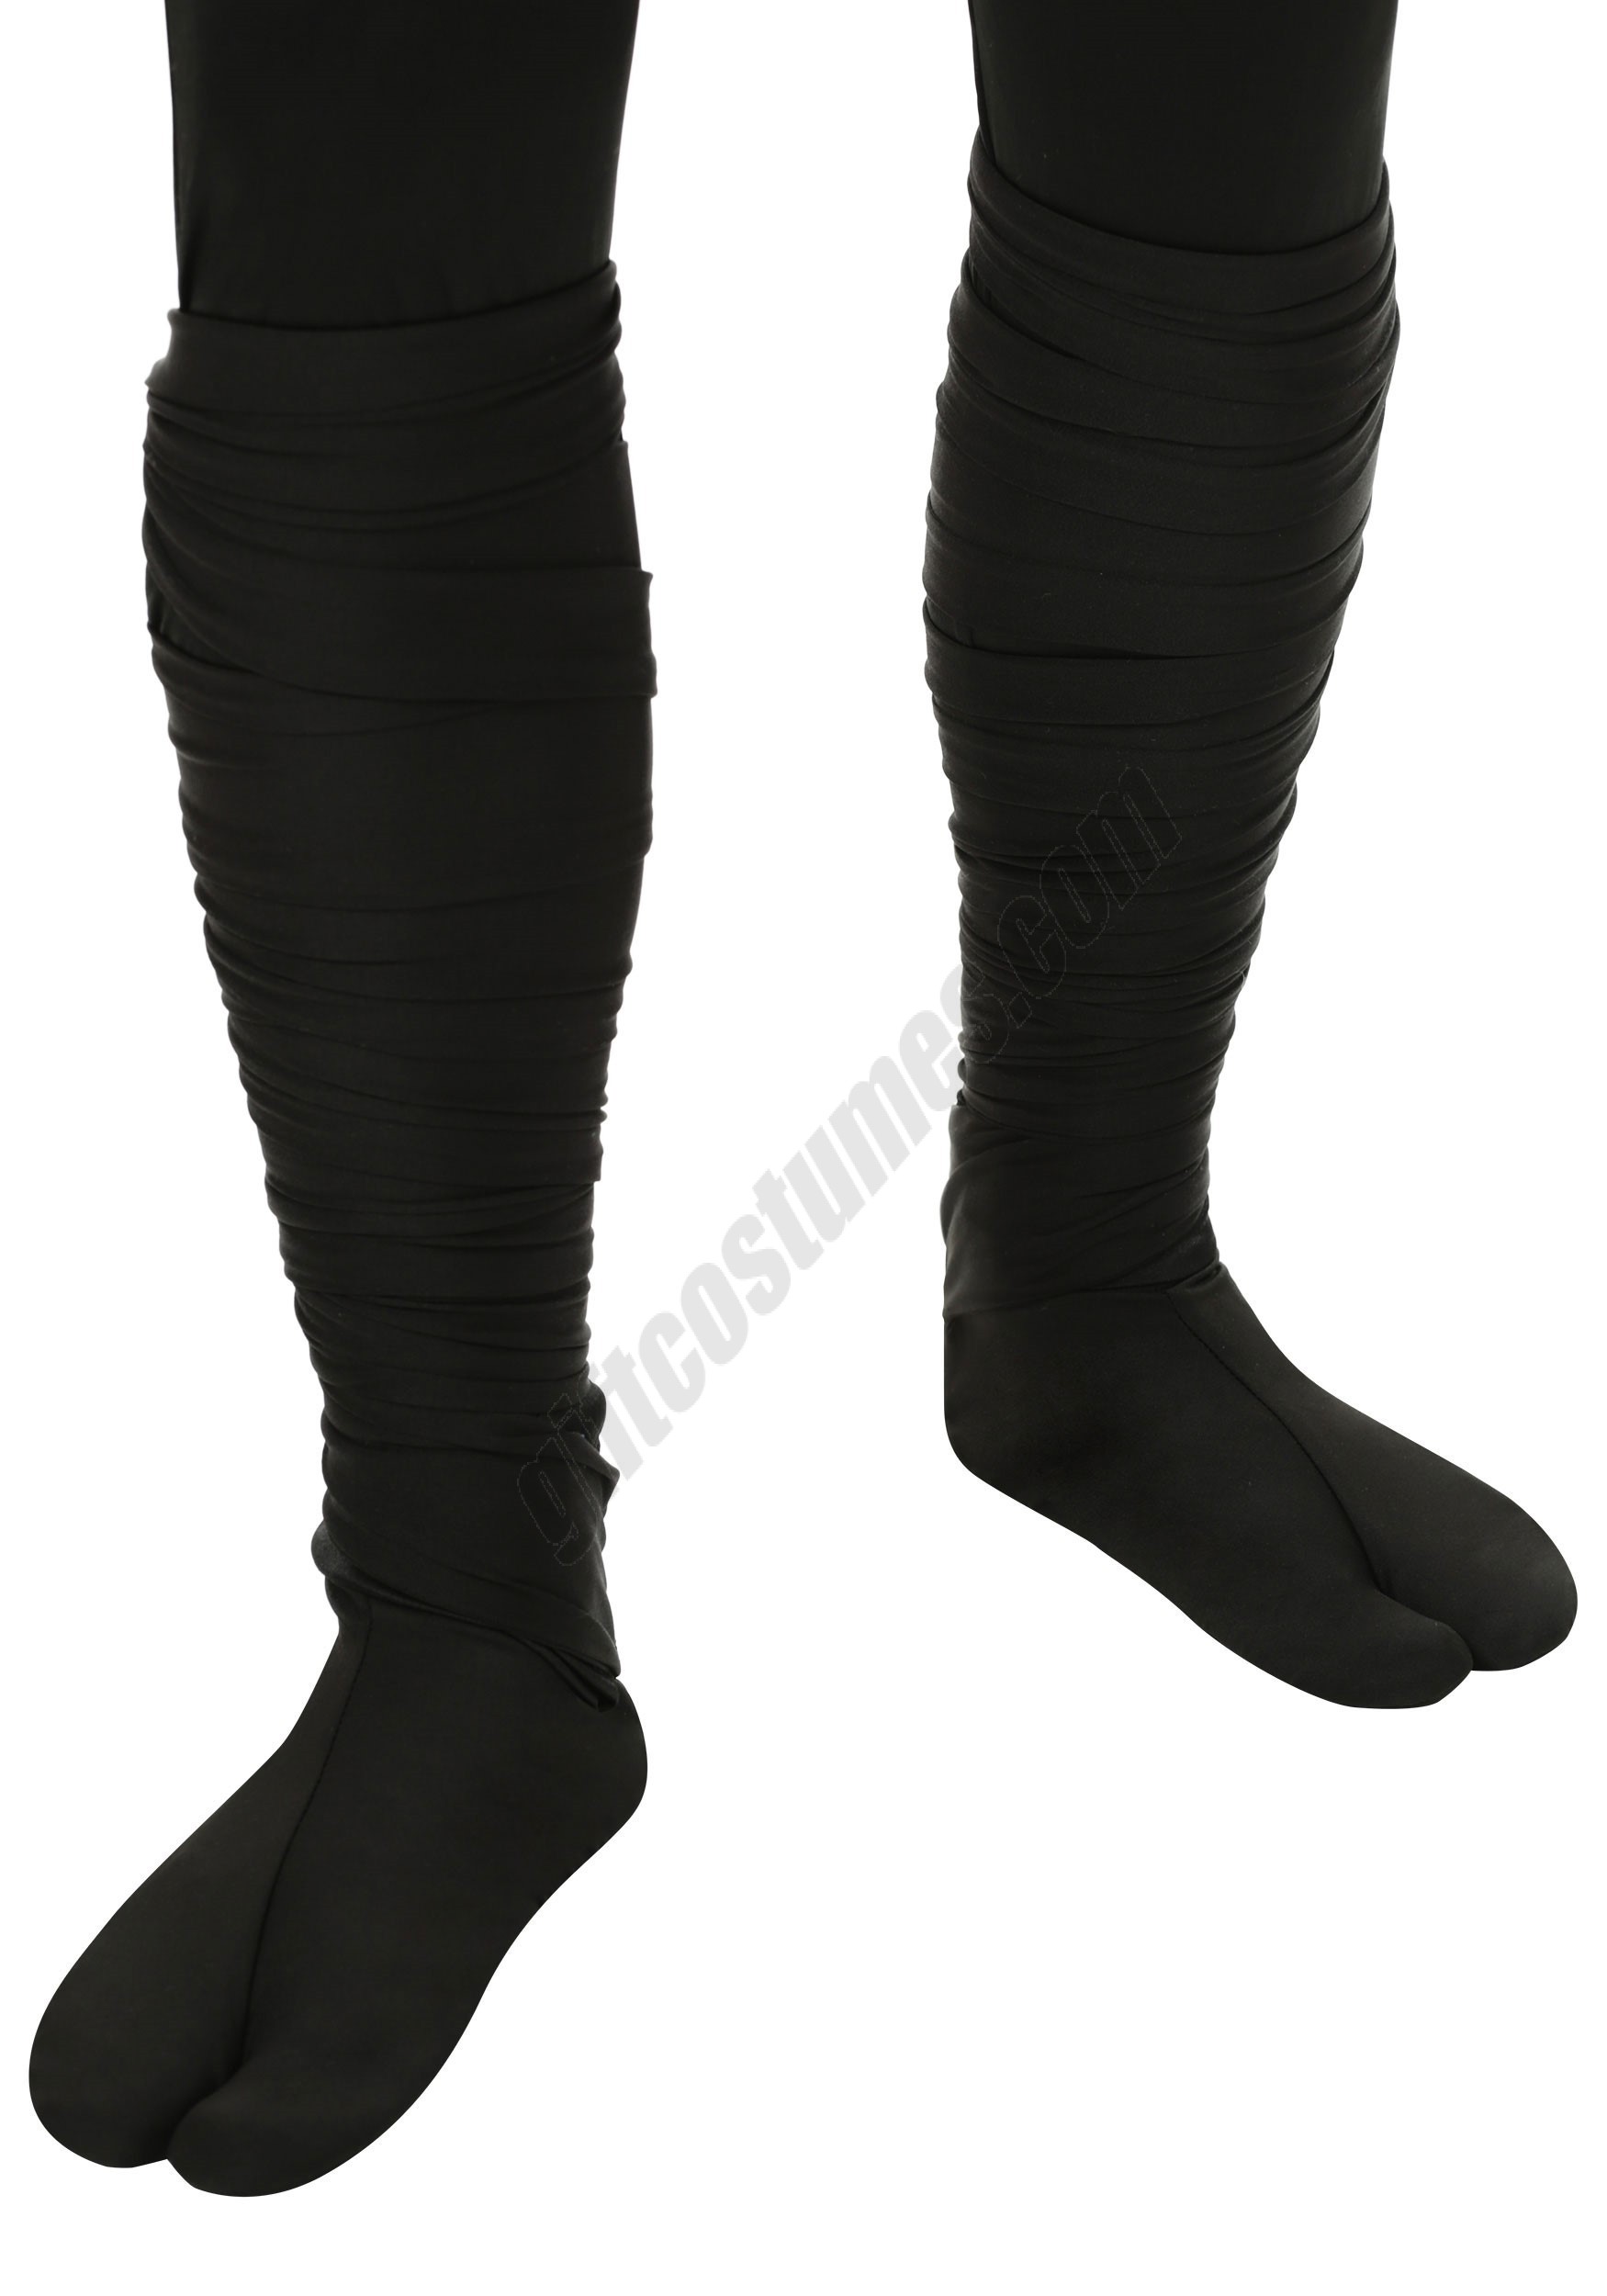 Ninja Costume Boots for Adults Promotions - Ninja Costume Boots for Adults Promotions